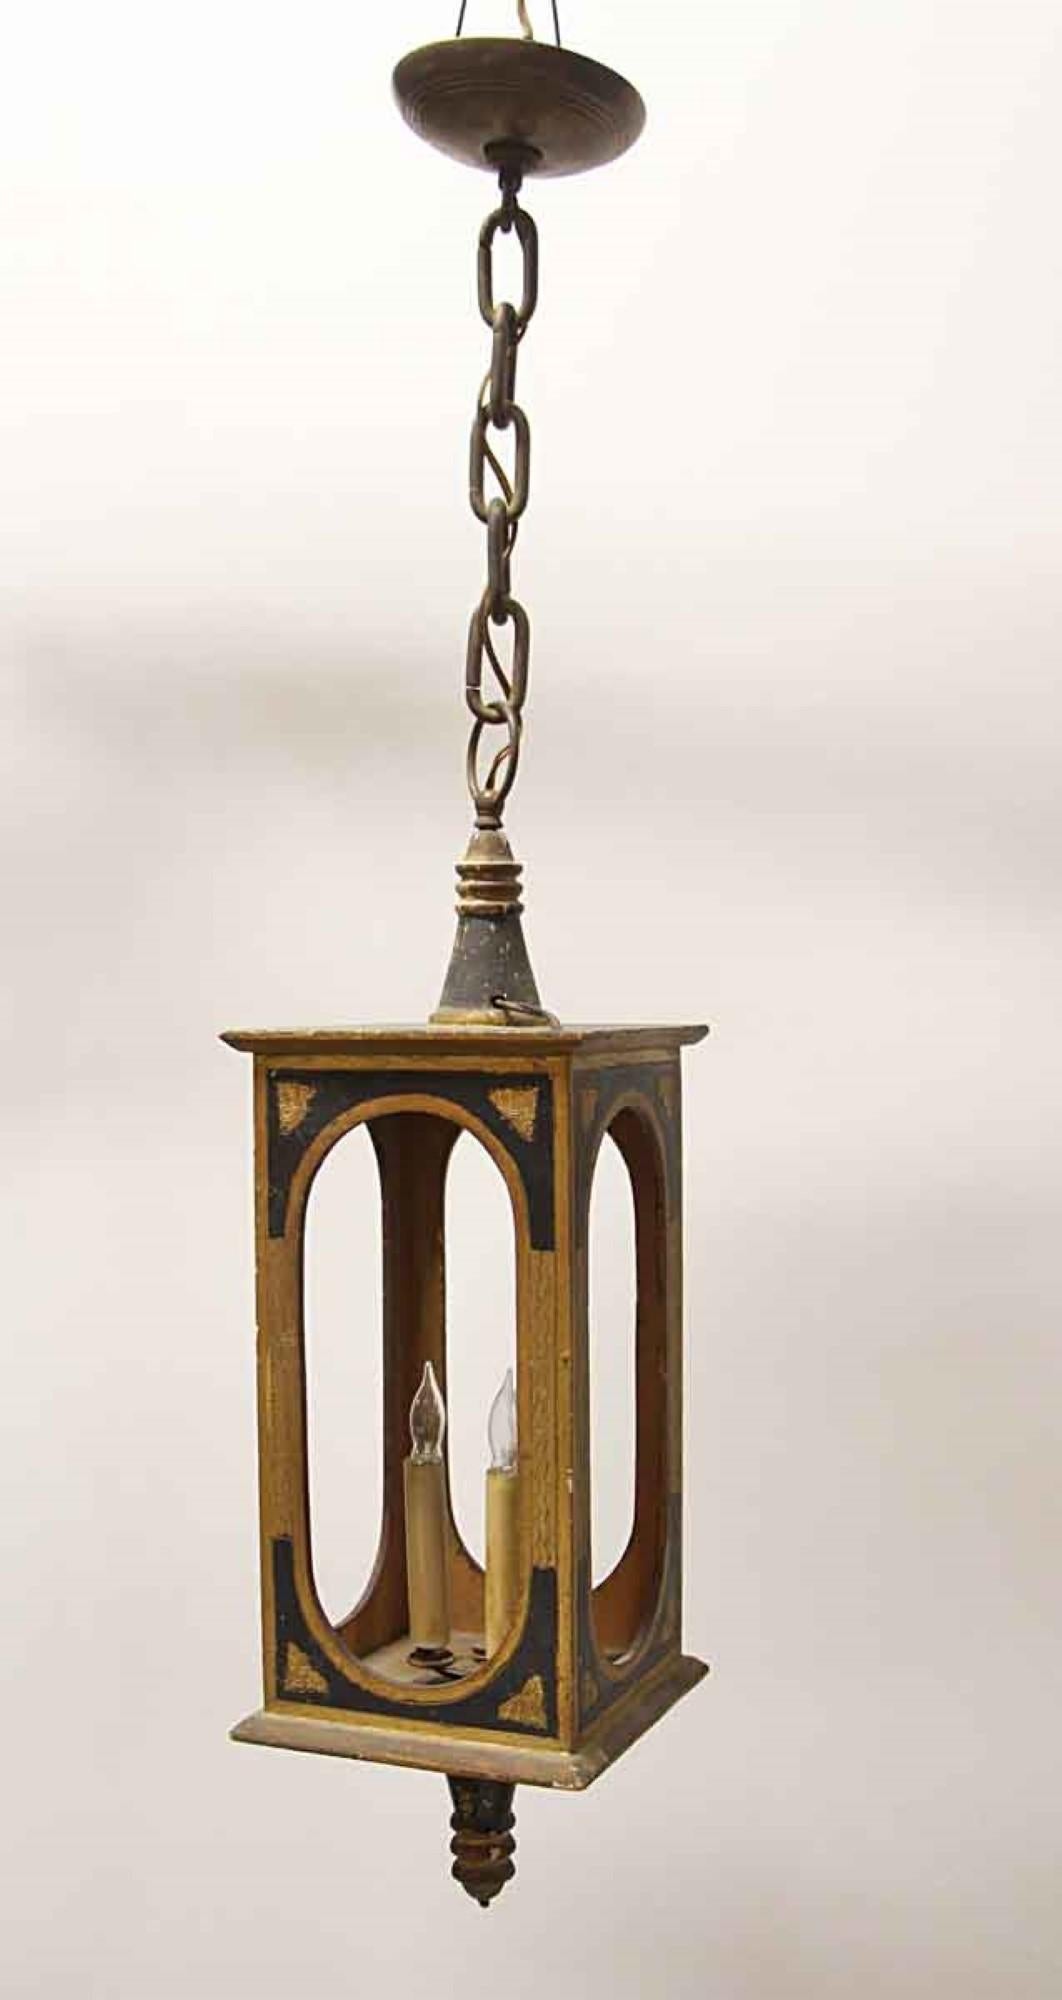 1940s wood pendant lantern with gold gilt and black carved details. Uses 3 candelabra bulbs. The Victorian style lantern body has an open frame which features no glass. This can be seen at our 400 Gilligan St location in Scranton, PA.